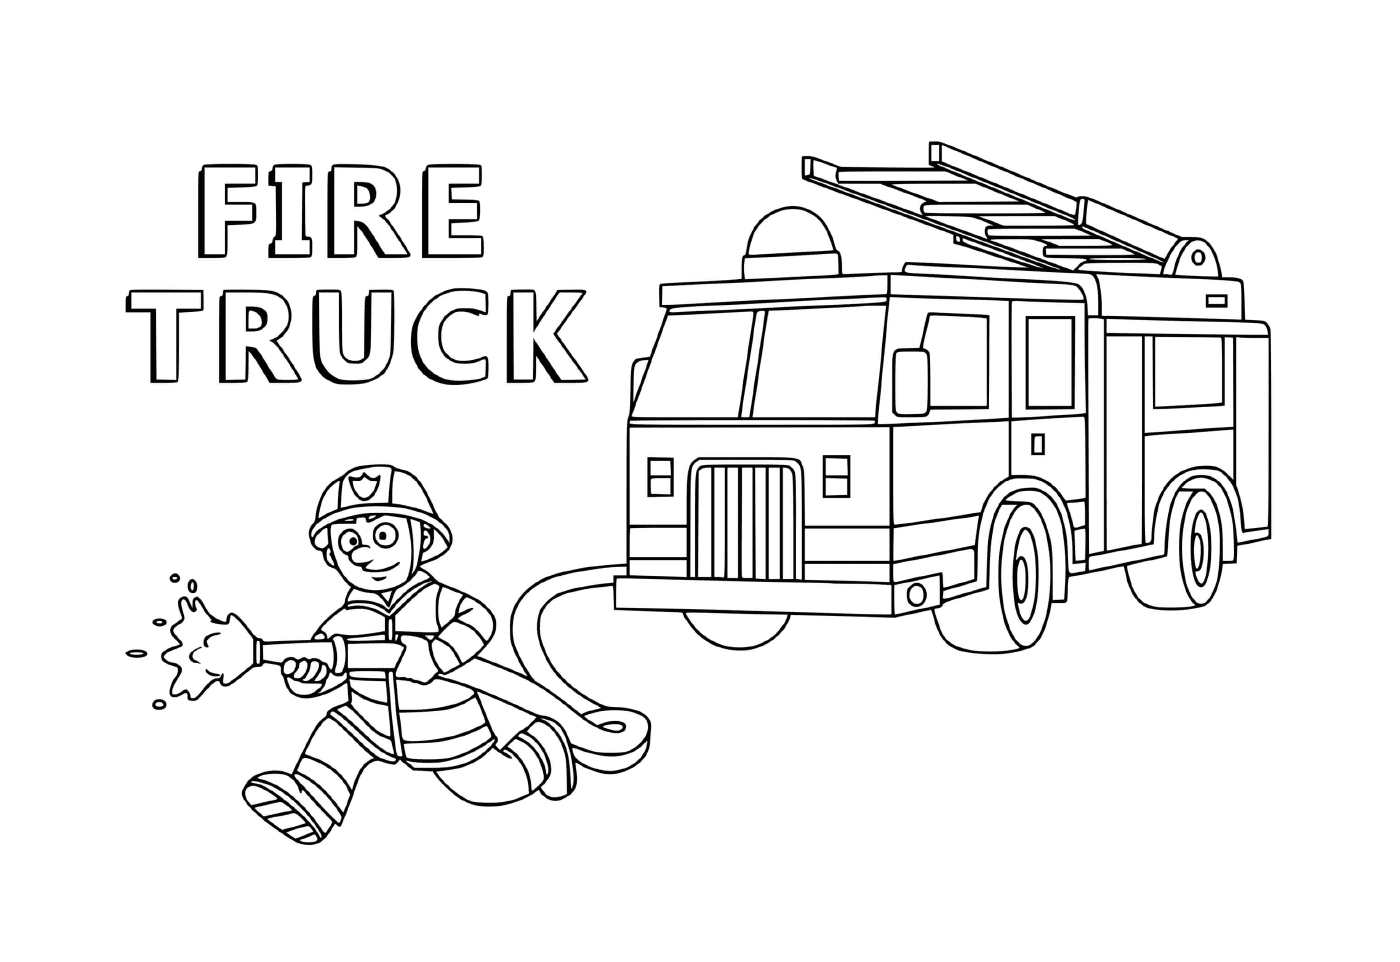  Fireman's truck in the service of citizens 